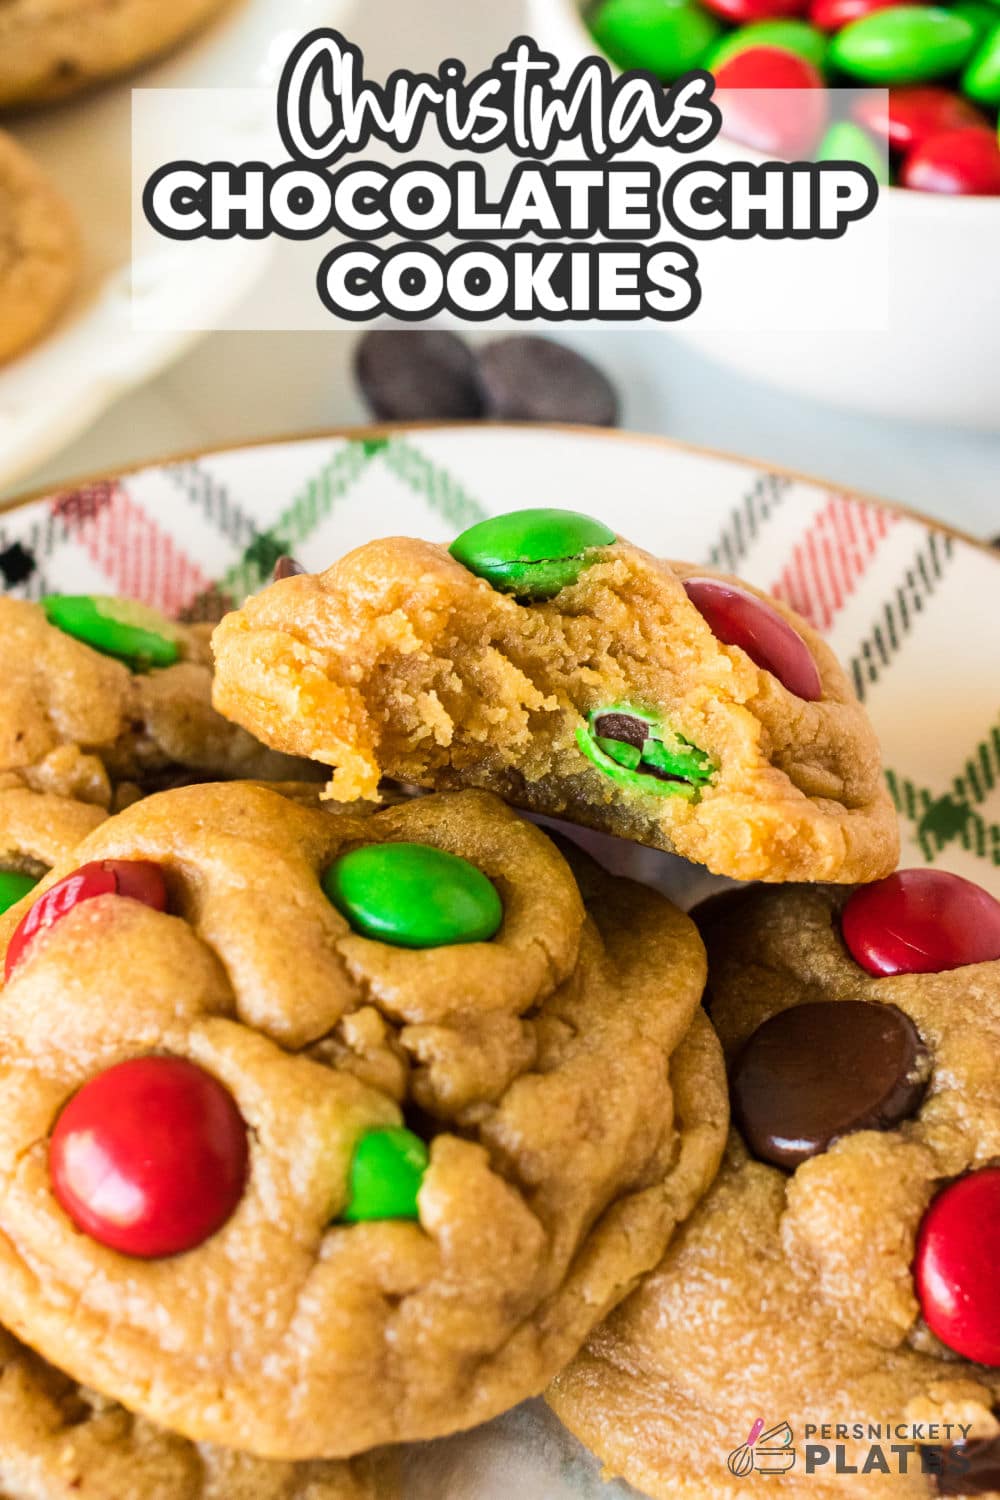 Chocolate Chip Cookies all dressed up for the holiday season! The classic chocolate chip cookie recipe get an upgrade with red and green m&m candies and a secret ingredient to make them extra soft and thick. | www.persnicketyplates.com